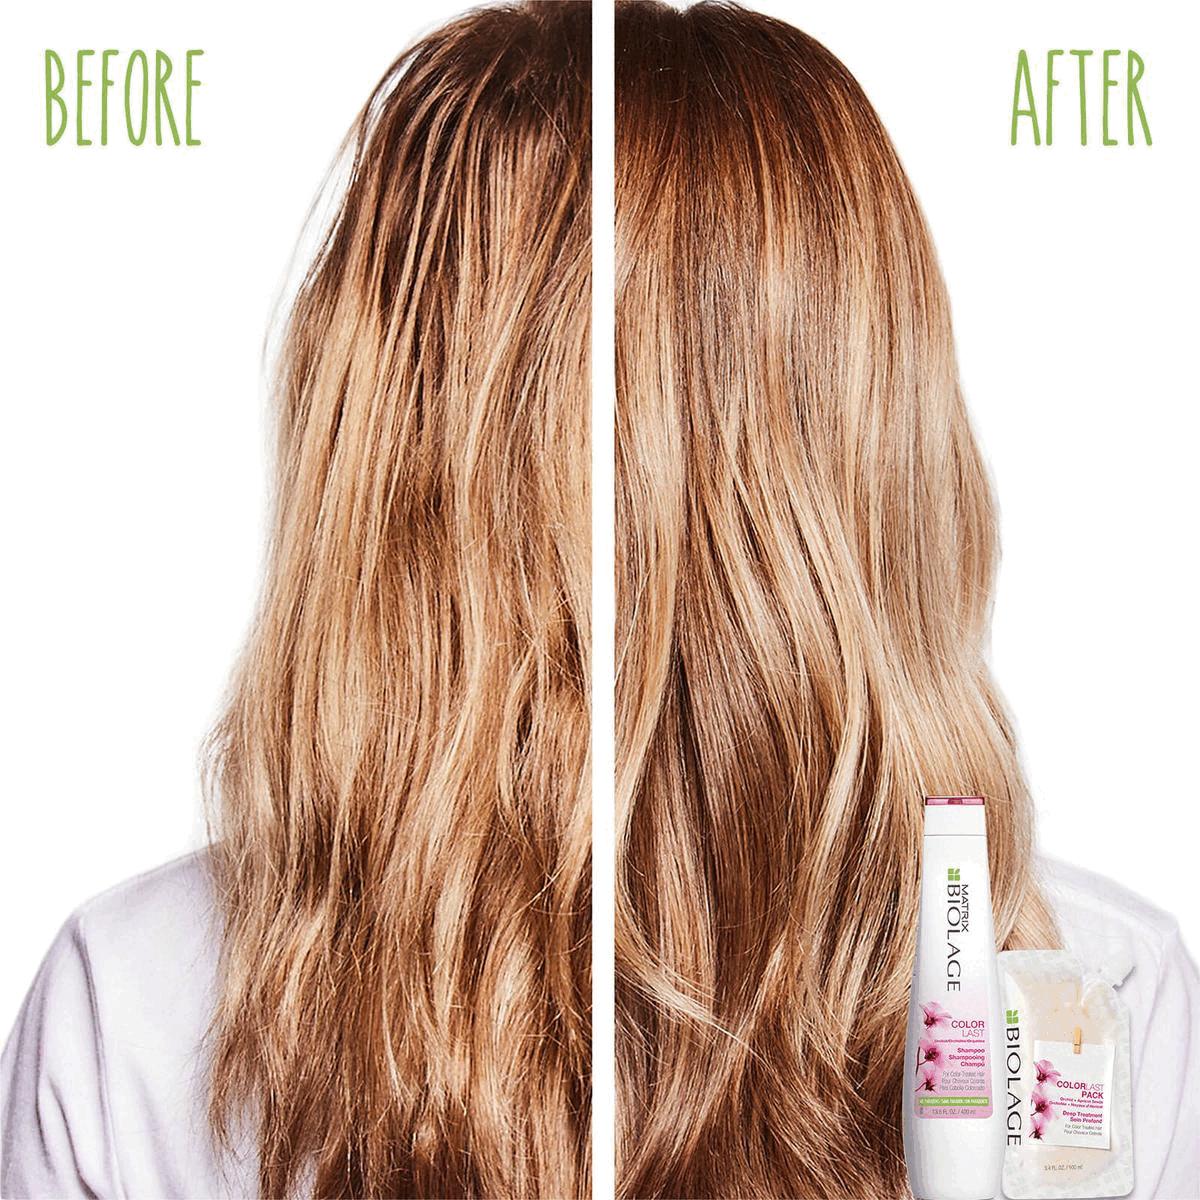 Before and after shot.Conditioner review. Conditioner Benefits